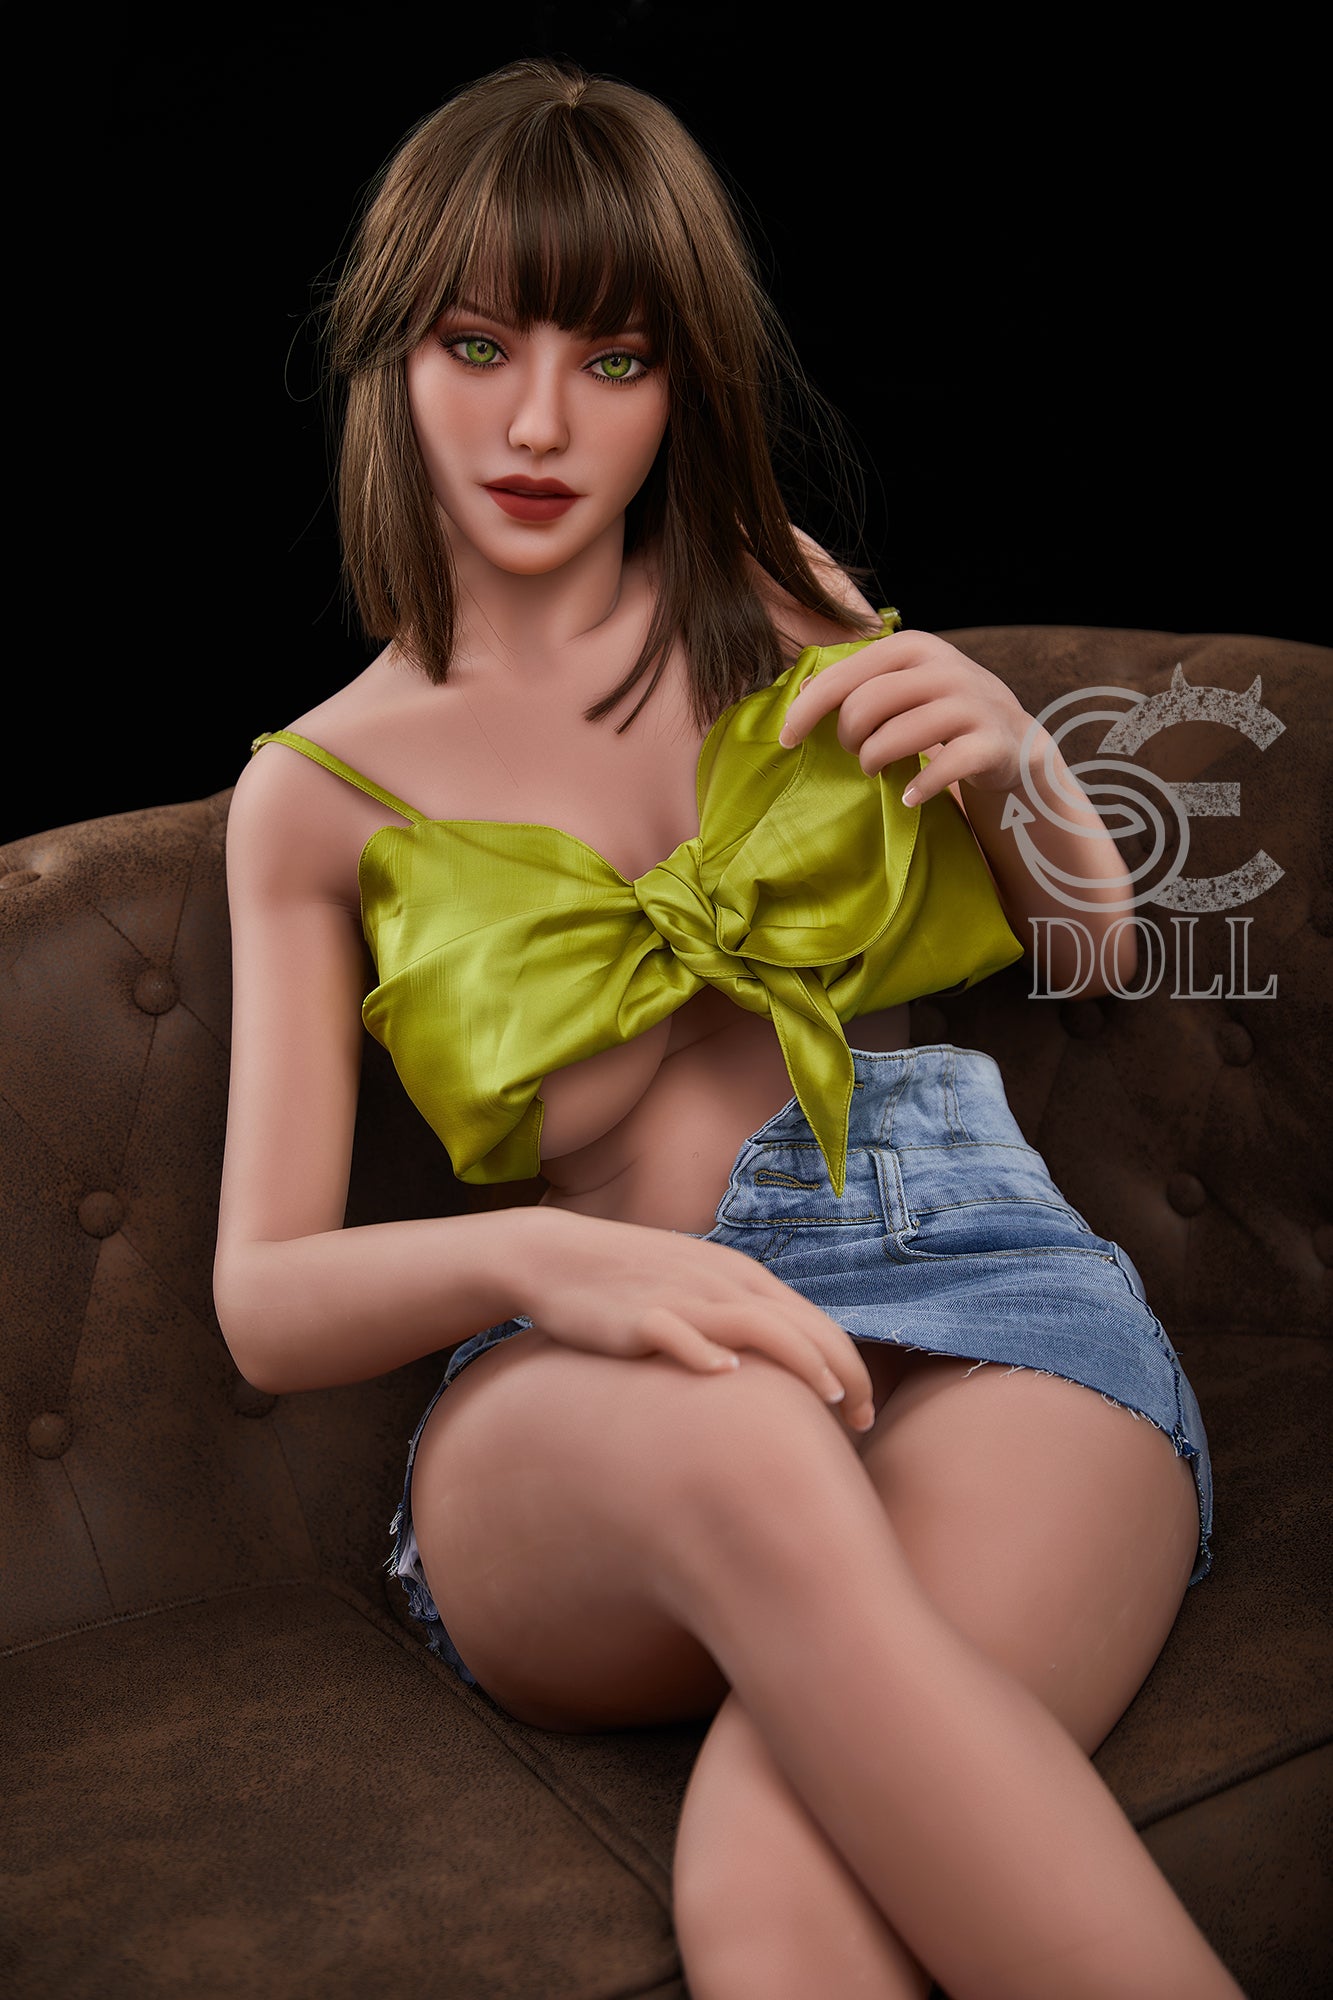 SEDOLL 157 cm H TPE - Grace | Buy Sex Dolls at DOLLS ACTUALLY